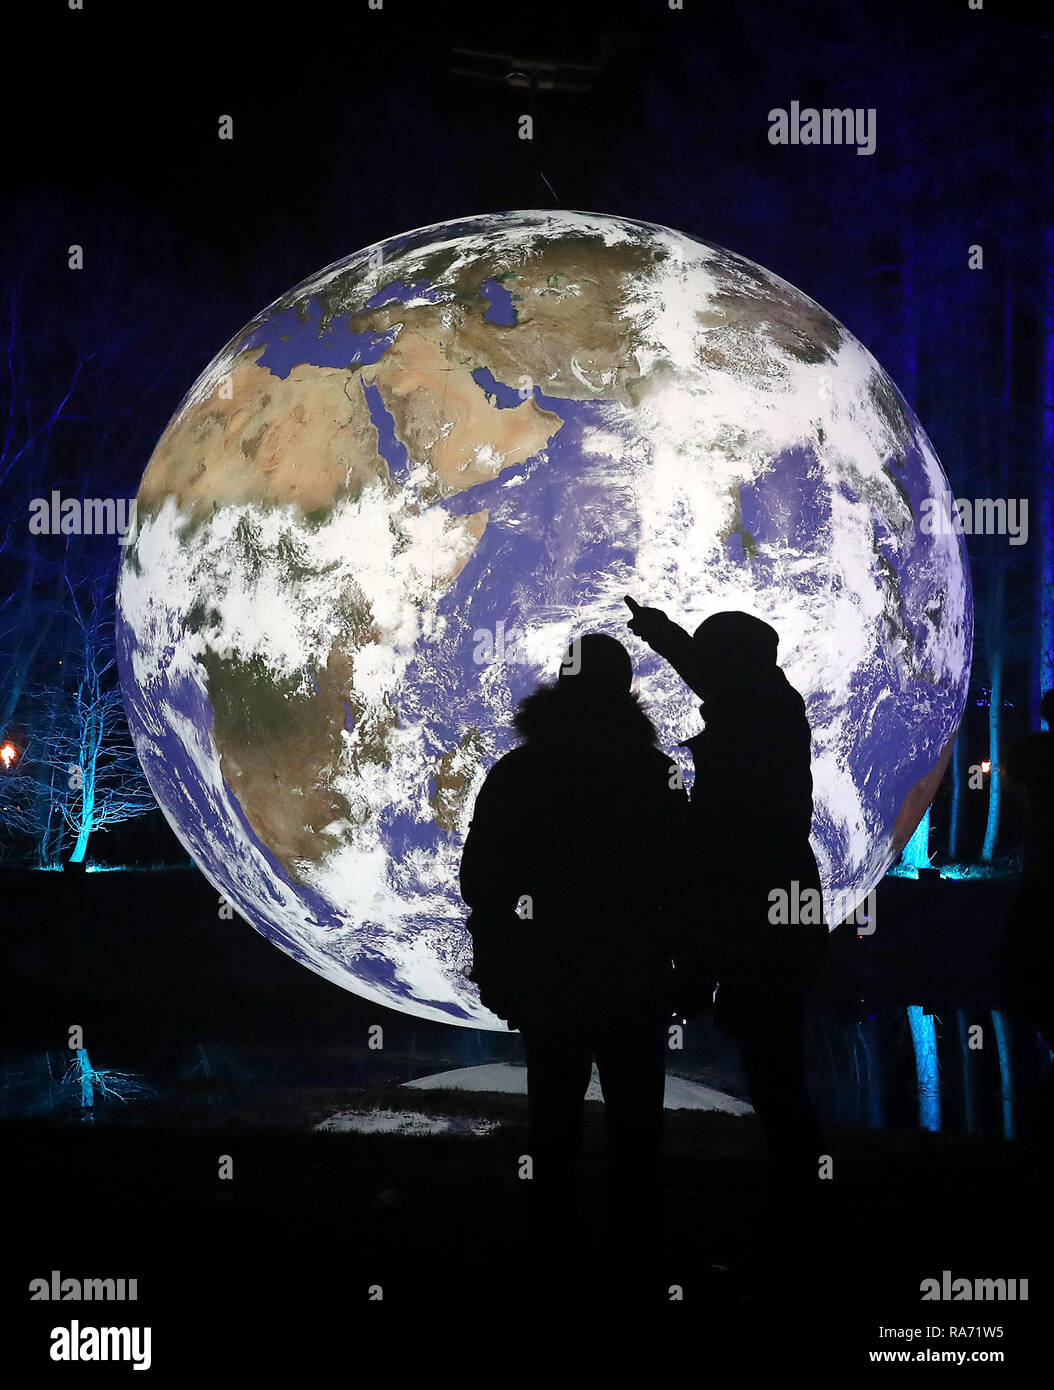 Visitors walks past the art installation Gaia, a seven-metre scale model of Earth created by artist Luke Jerram on the opening night of the Fire & Light: Cosmic Fortunes installation, an illuminated outdoor experience held at the Helix Park and the Kelpies in Falkirk. Stock Photo